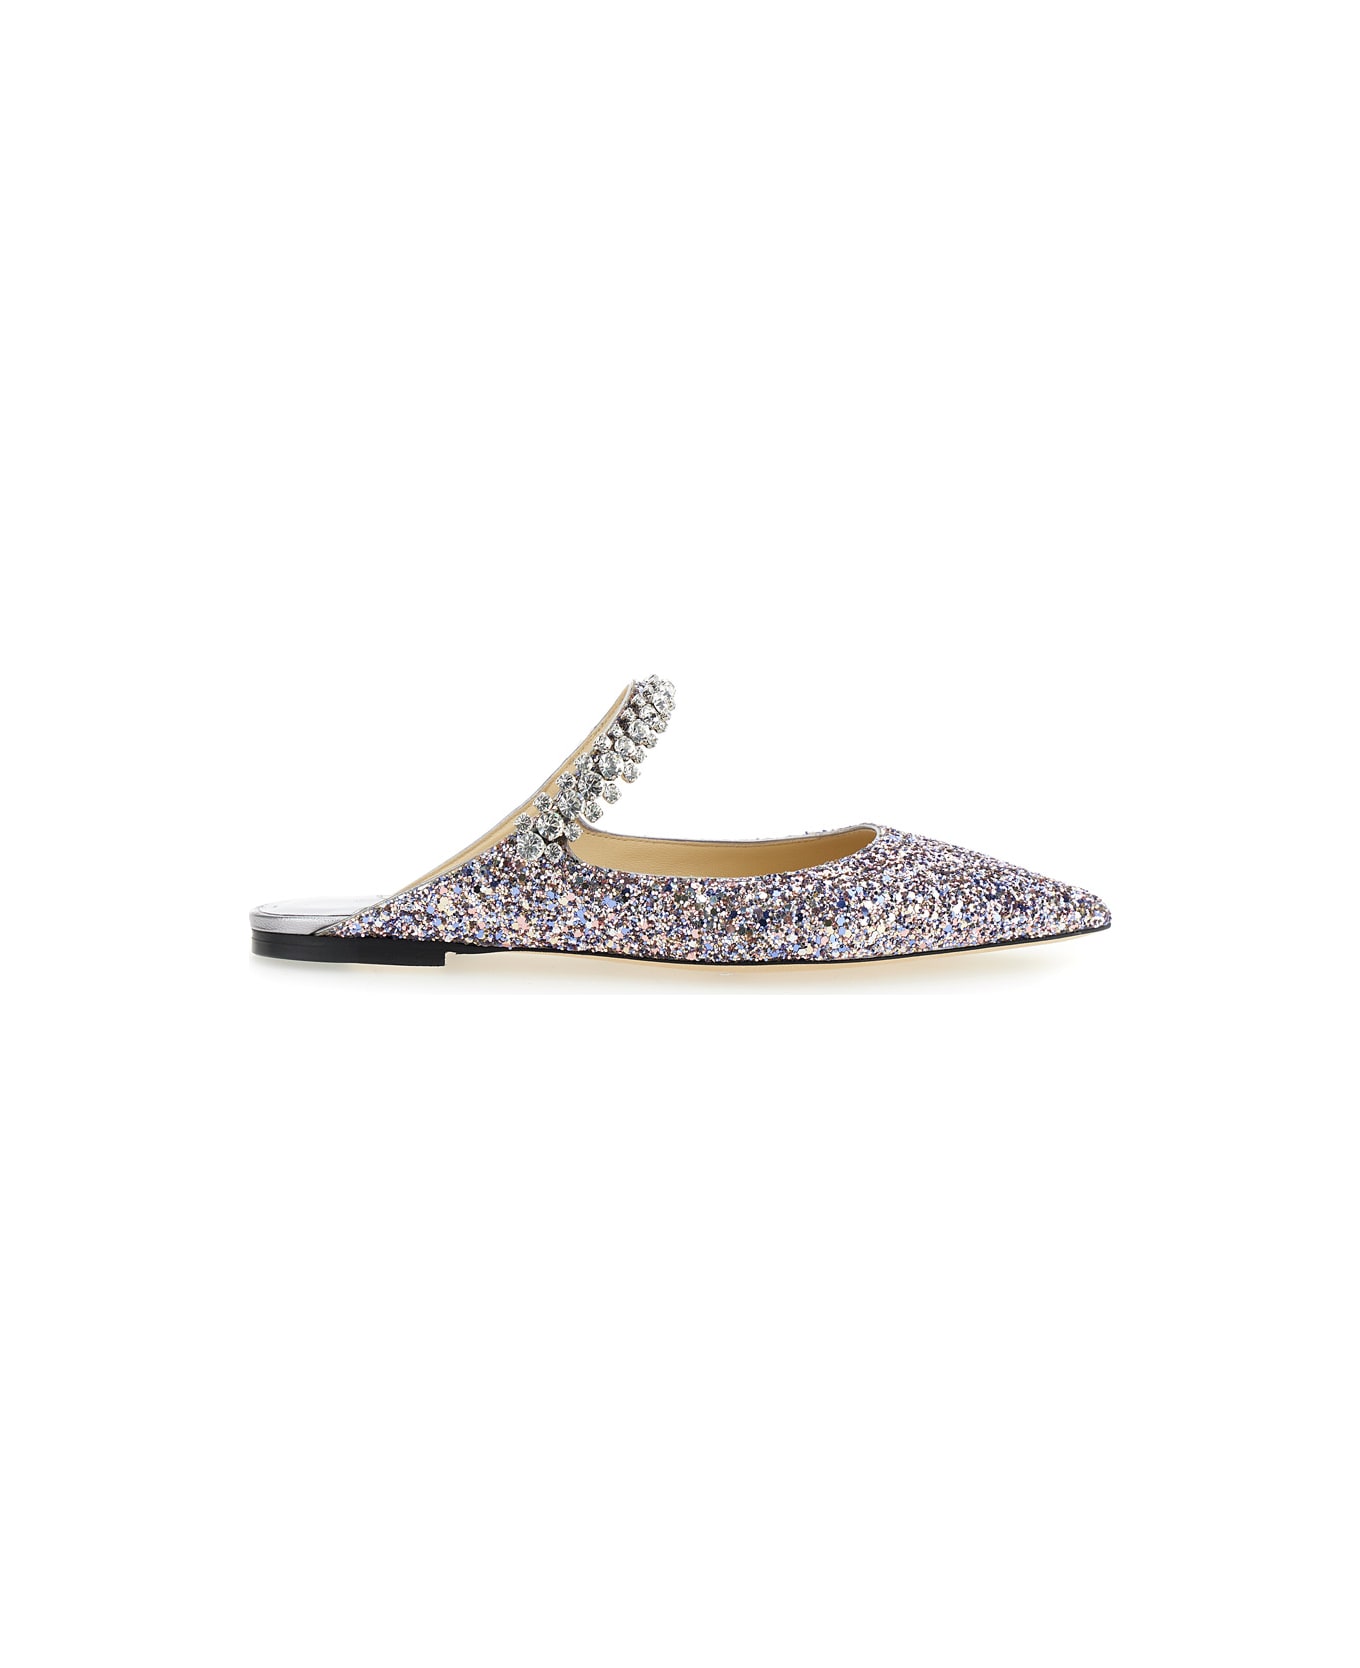 Jimmy Choo 'bling Flat' Multicolor Mules With Crystal Strap In Glitter Fabric Woman - Metallic フラットシューズ